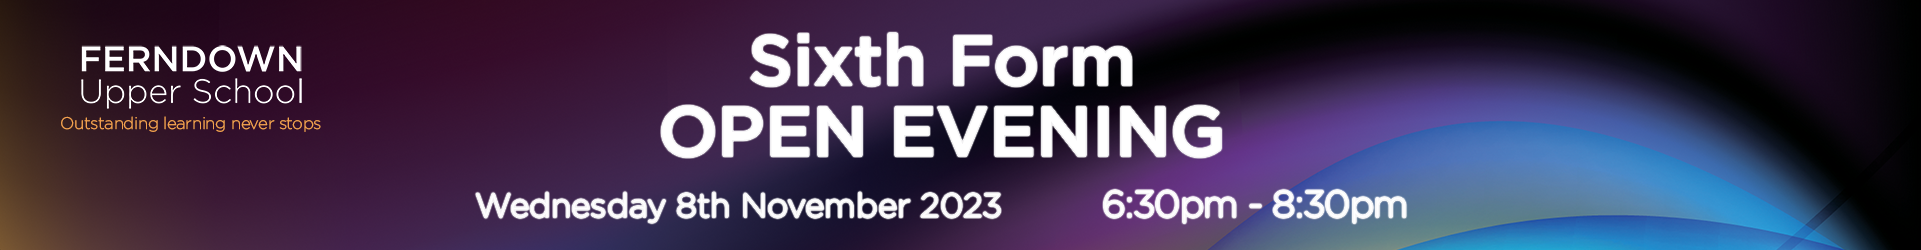 Sixth-Form-Open-Evening-Banner-2023-Web-Site